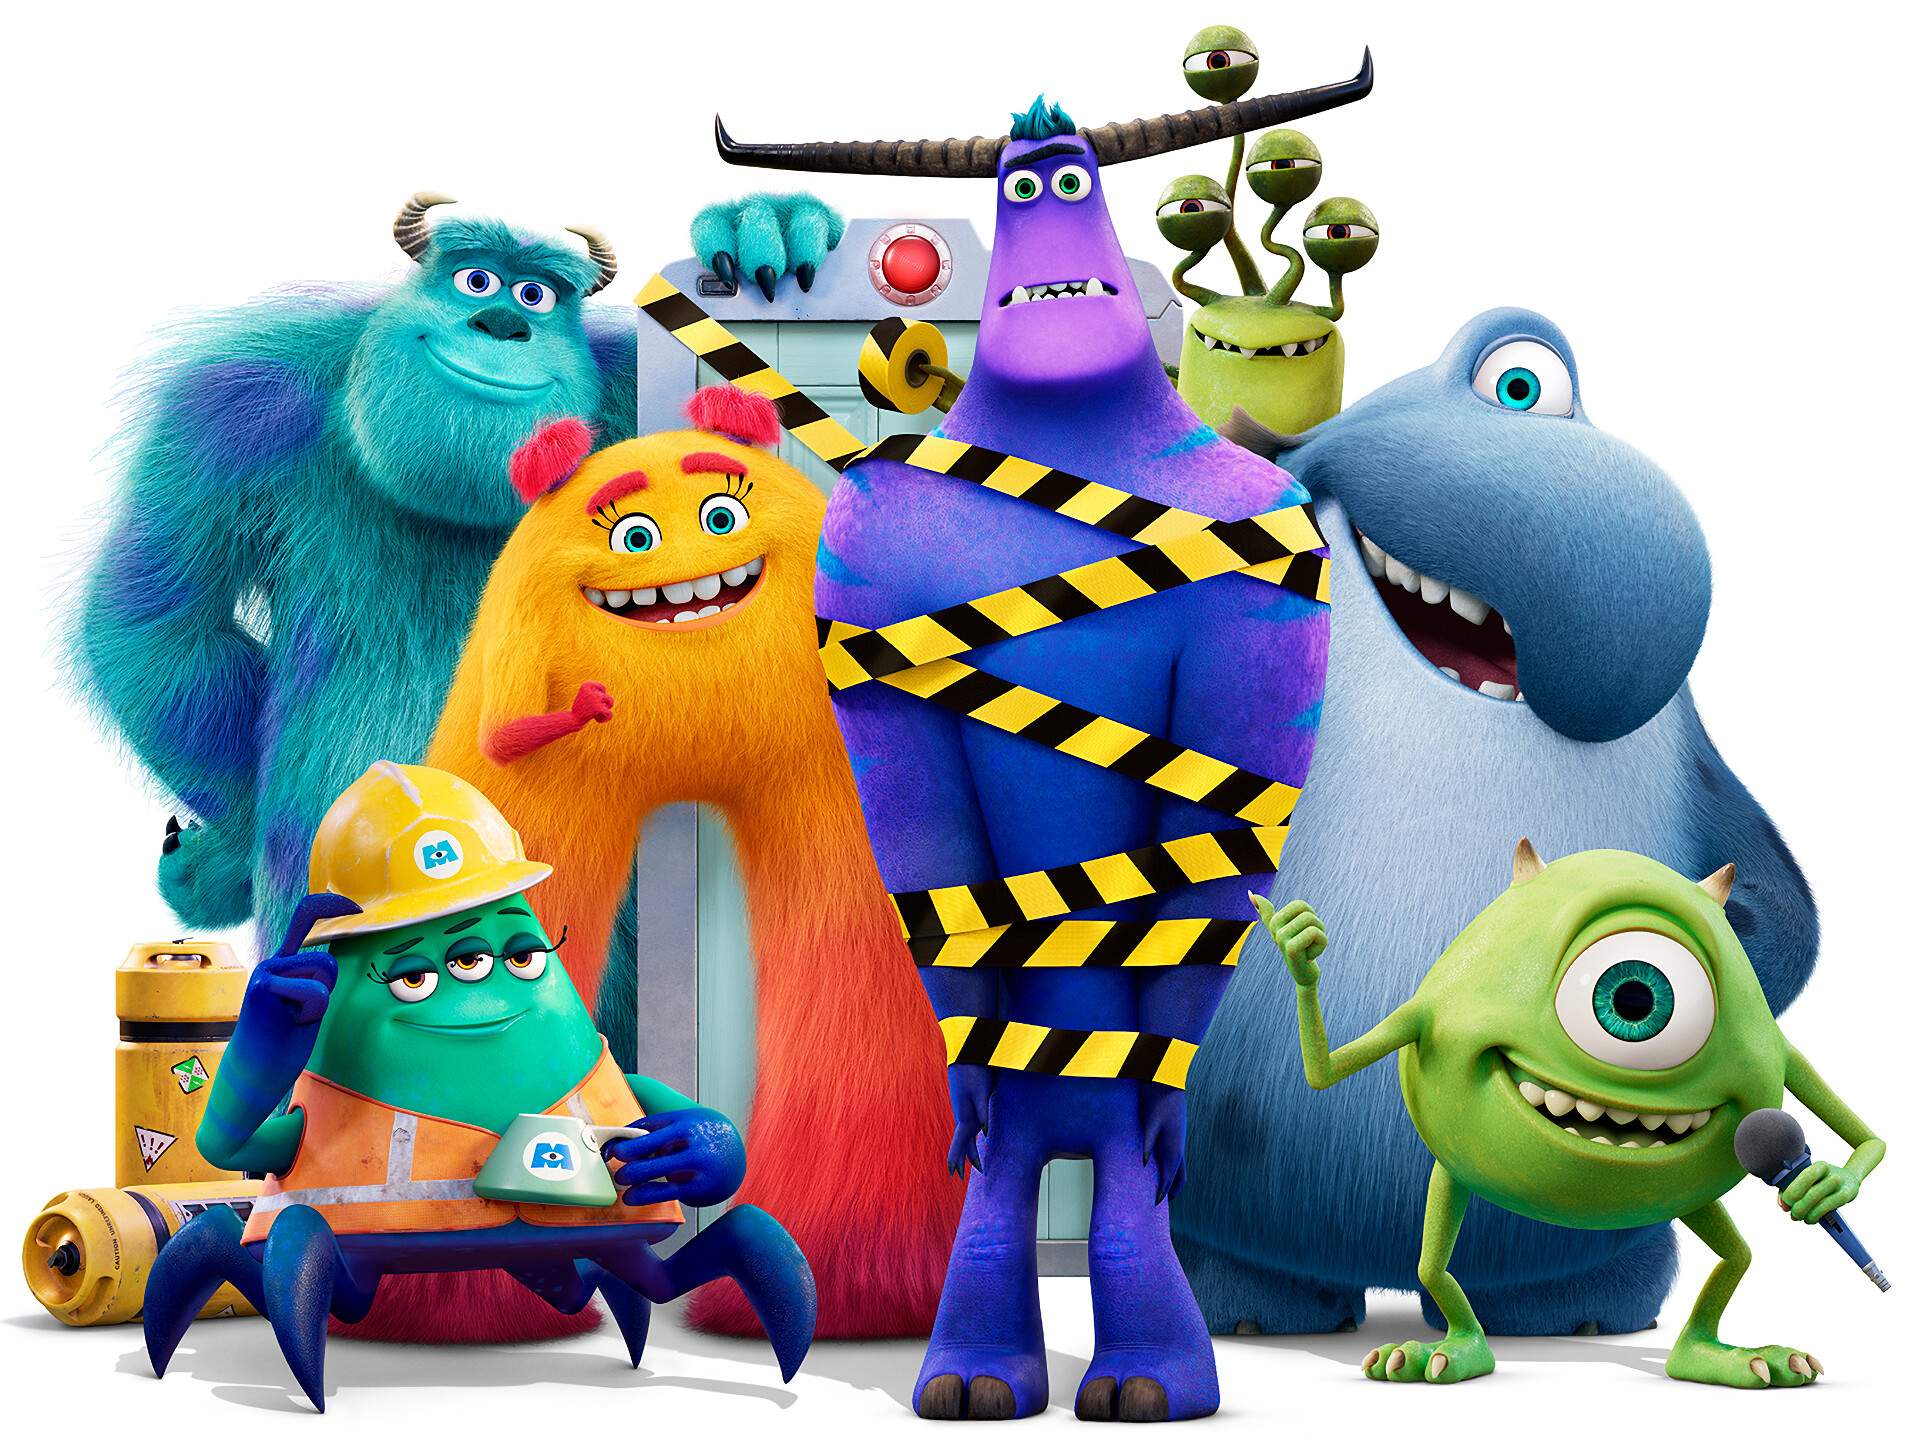 Monsters at Work: The series features the voices of Billy Crystal and John Goodman as Mike Wazowski and James P. "Sulley" Sullivan. 1920x1440 HD Wallpaper.